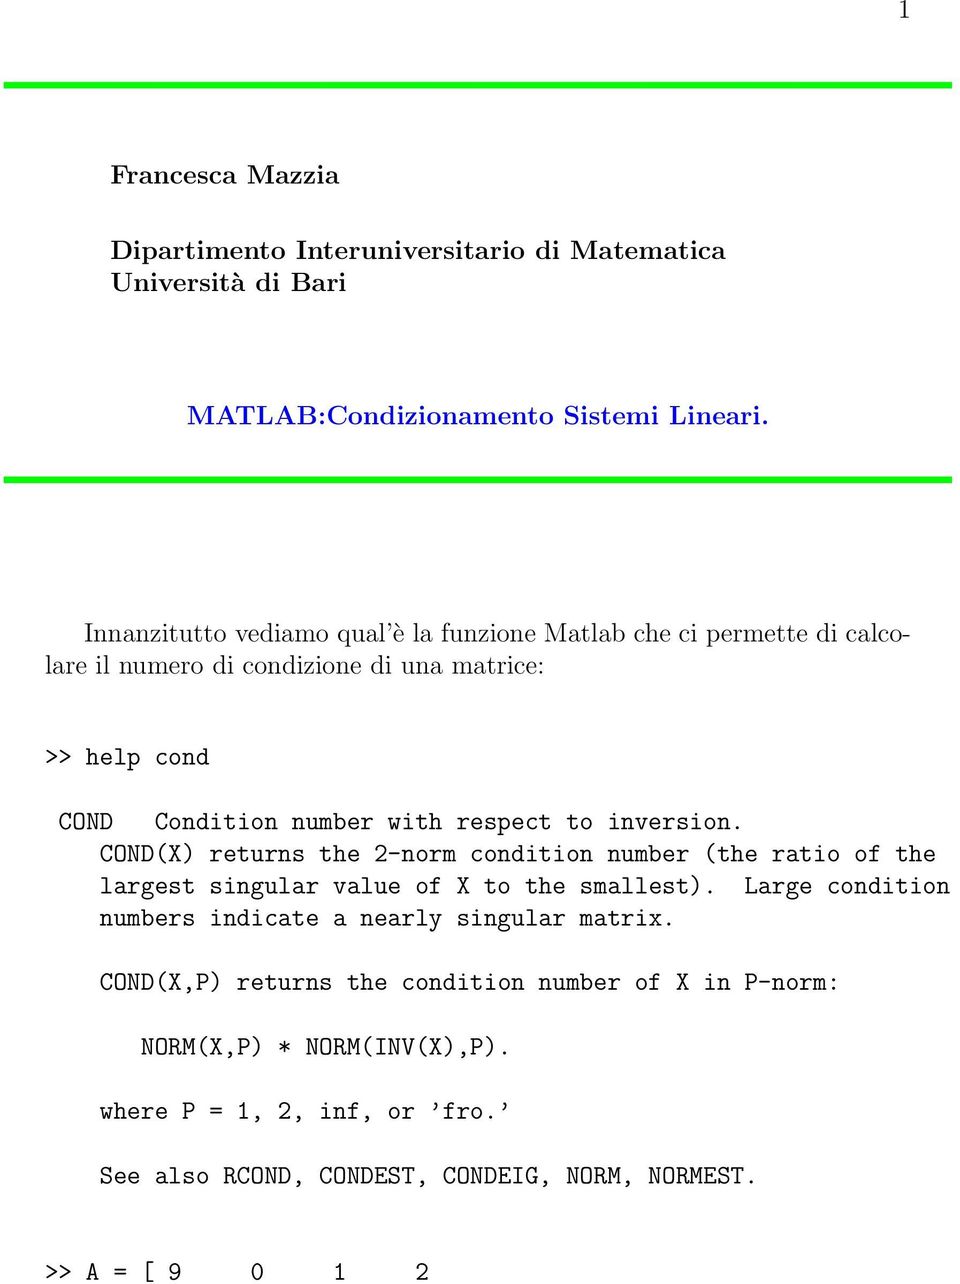 respect to inversion. COND(X) returns the 2-norm condition number (the ratio of the largest singular value of X to the smallest).